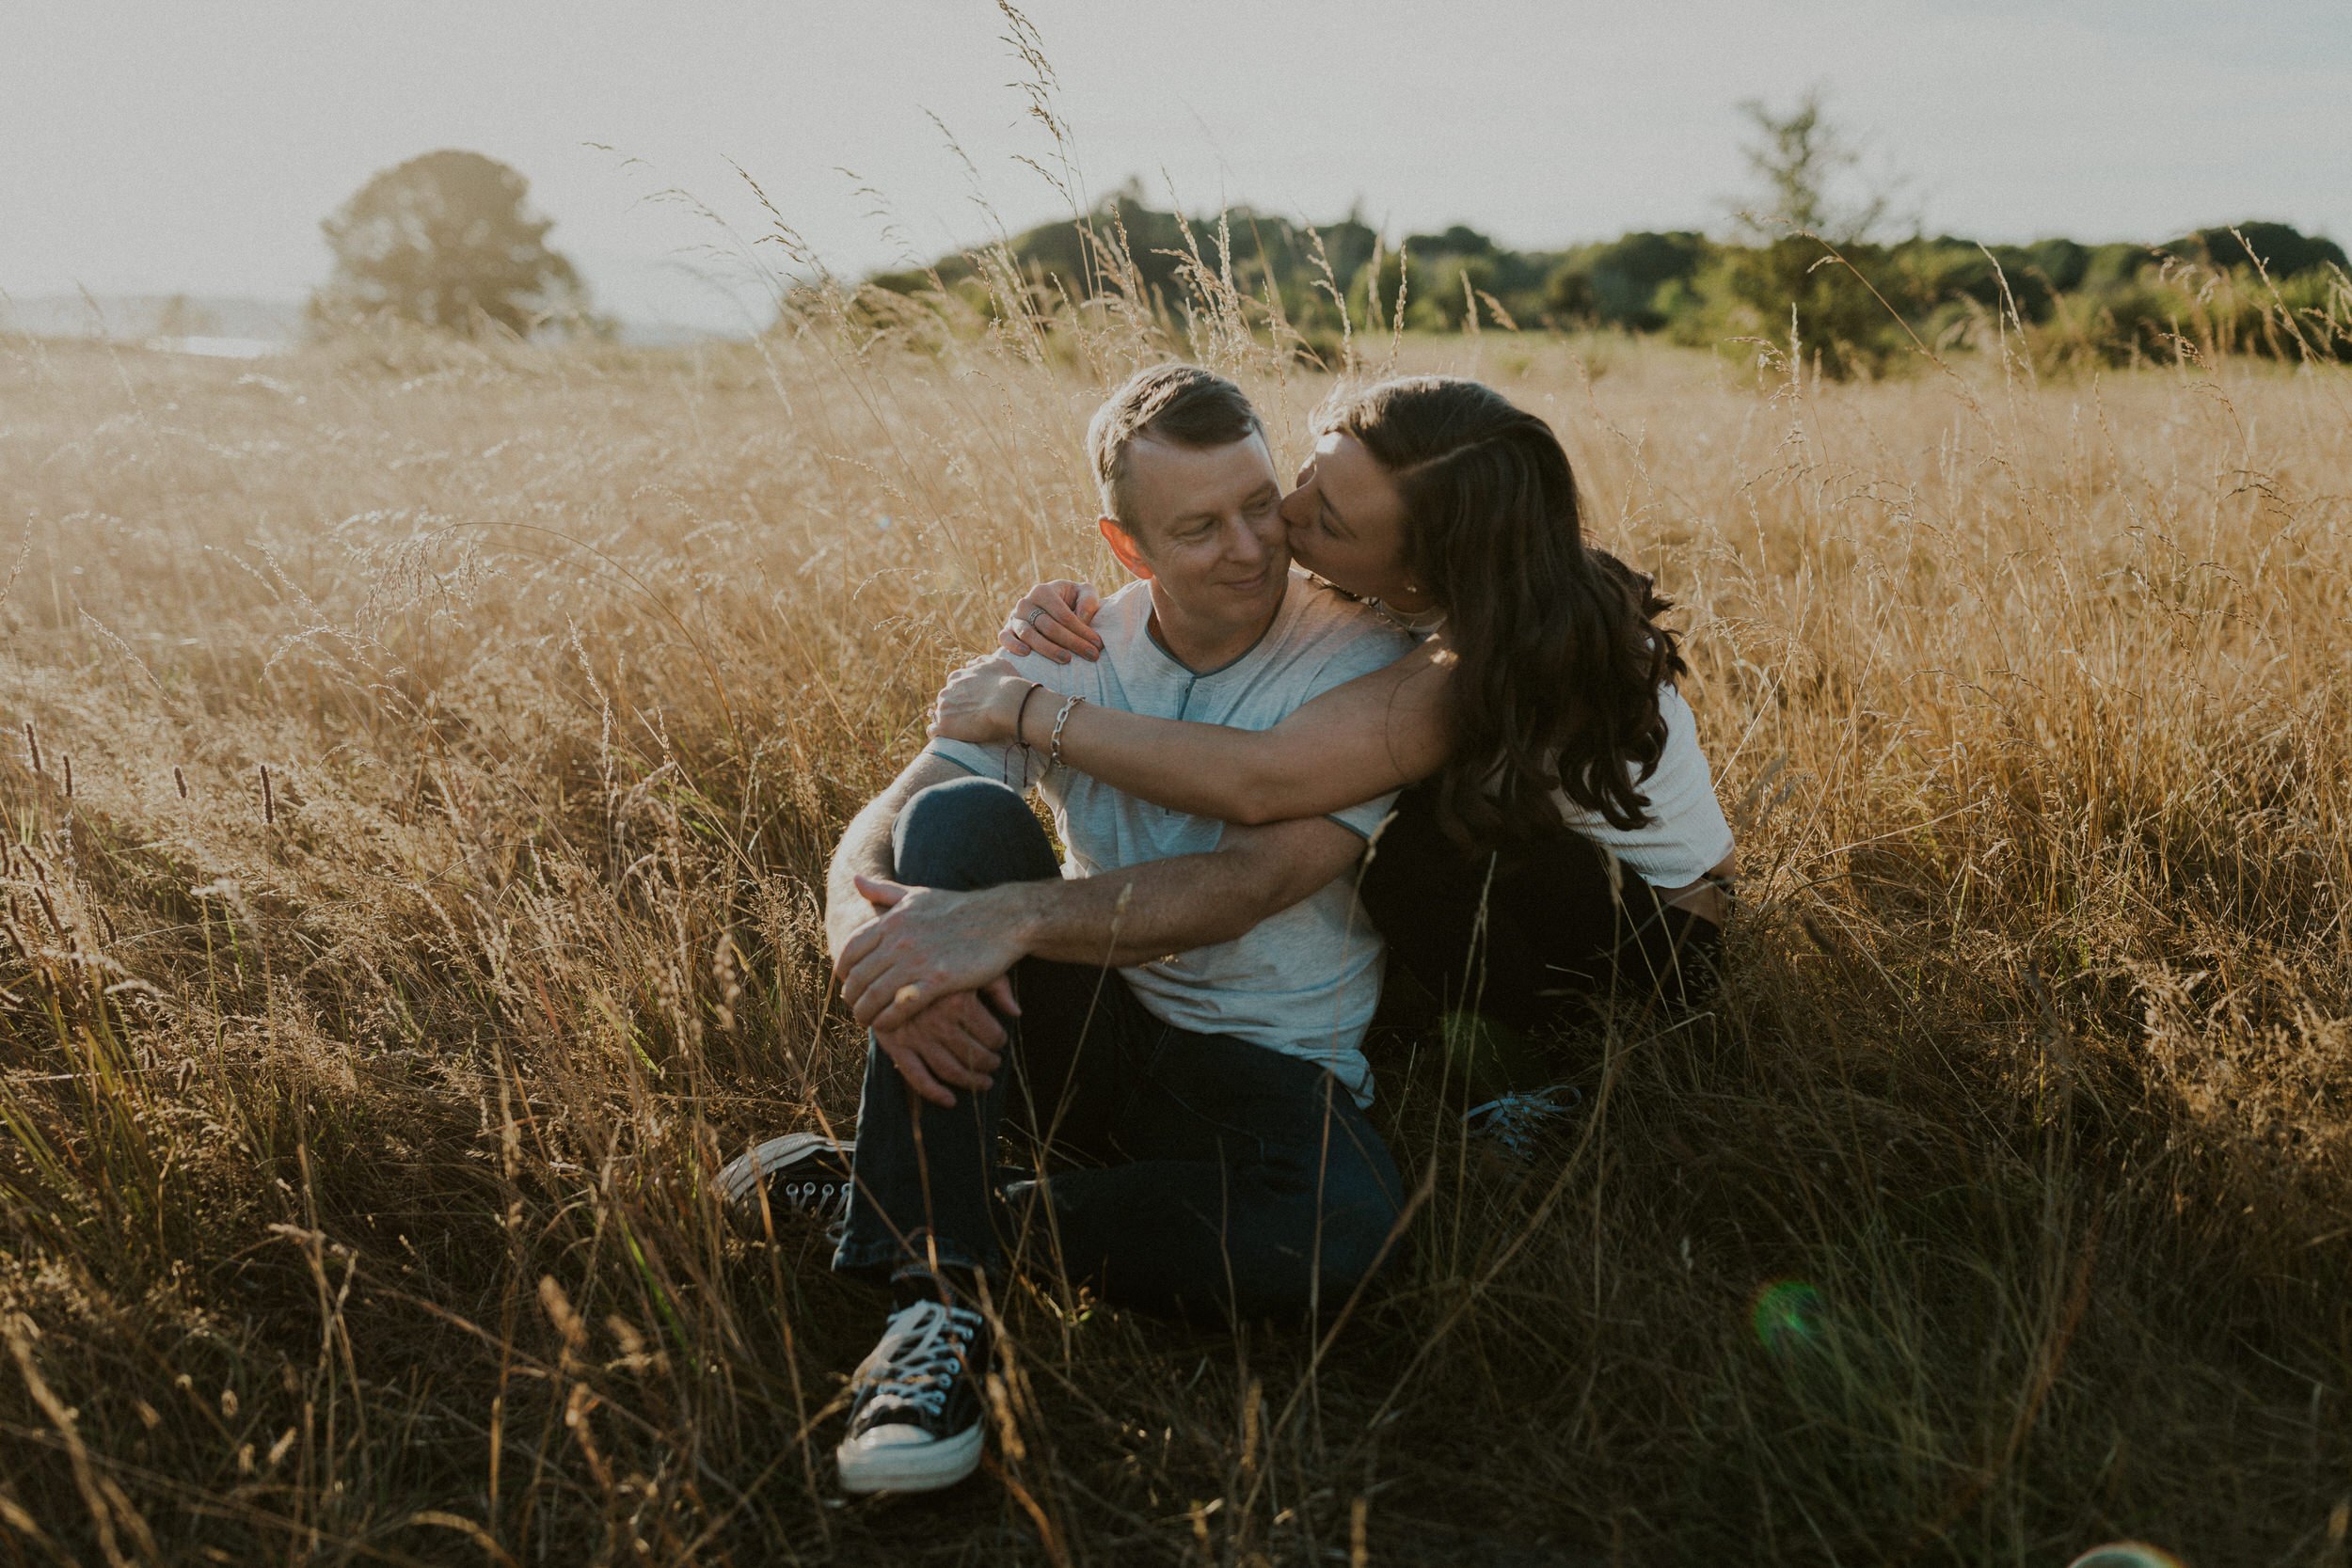 discovery-park-seattle-engagement-session24.jpg